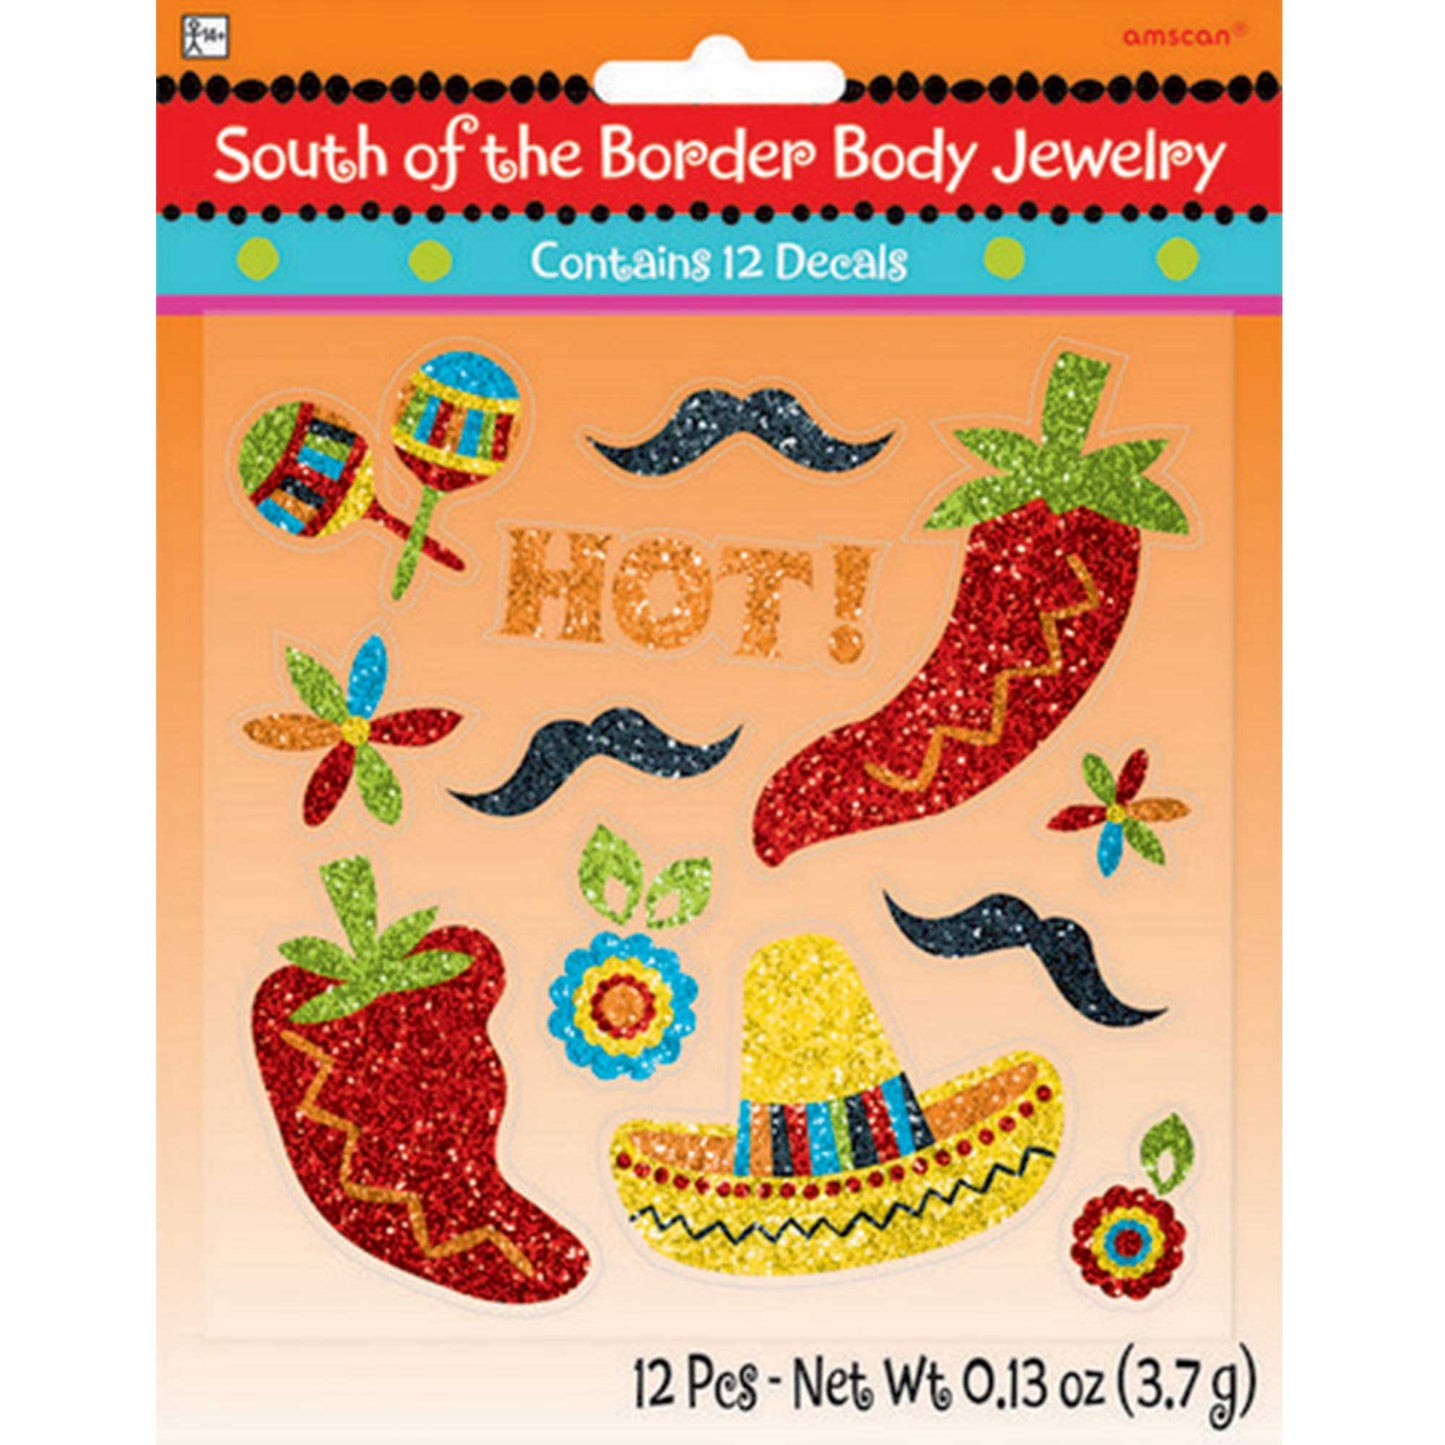 Fiesta South of the Border Body Jewelry